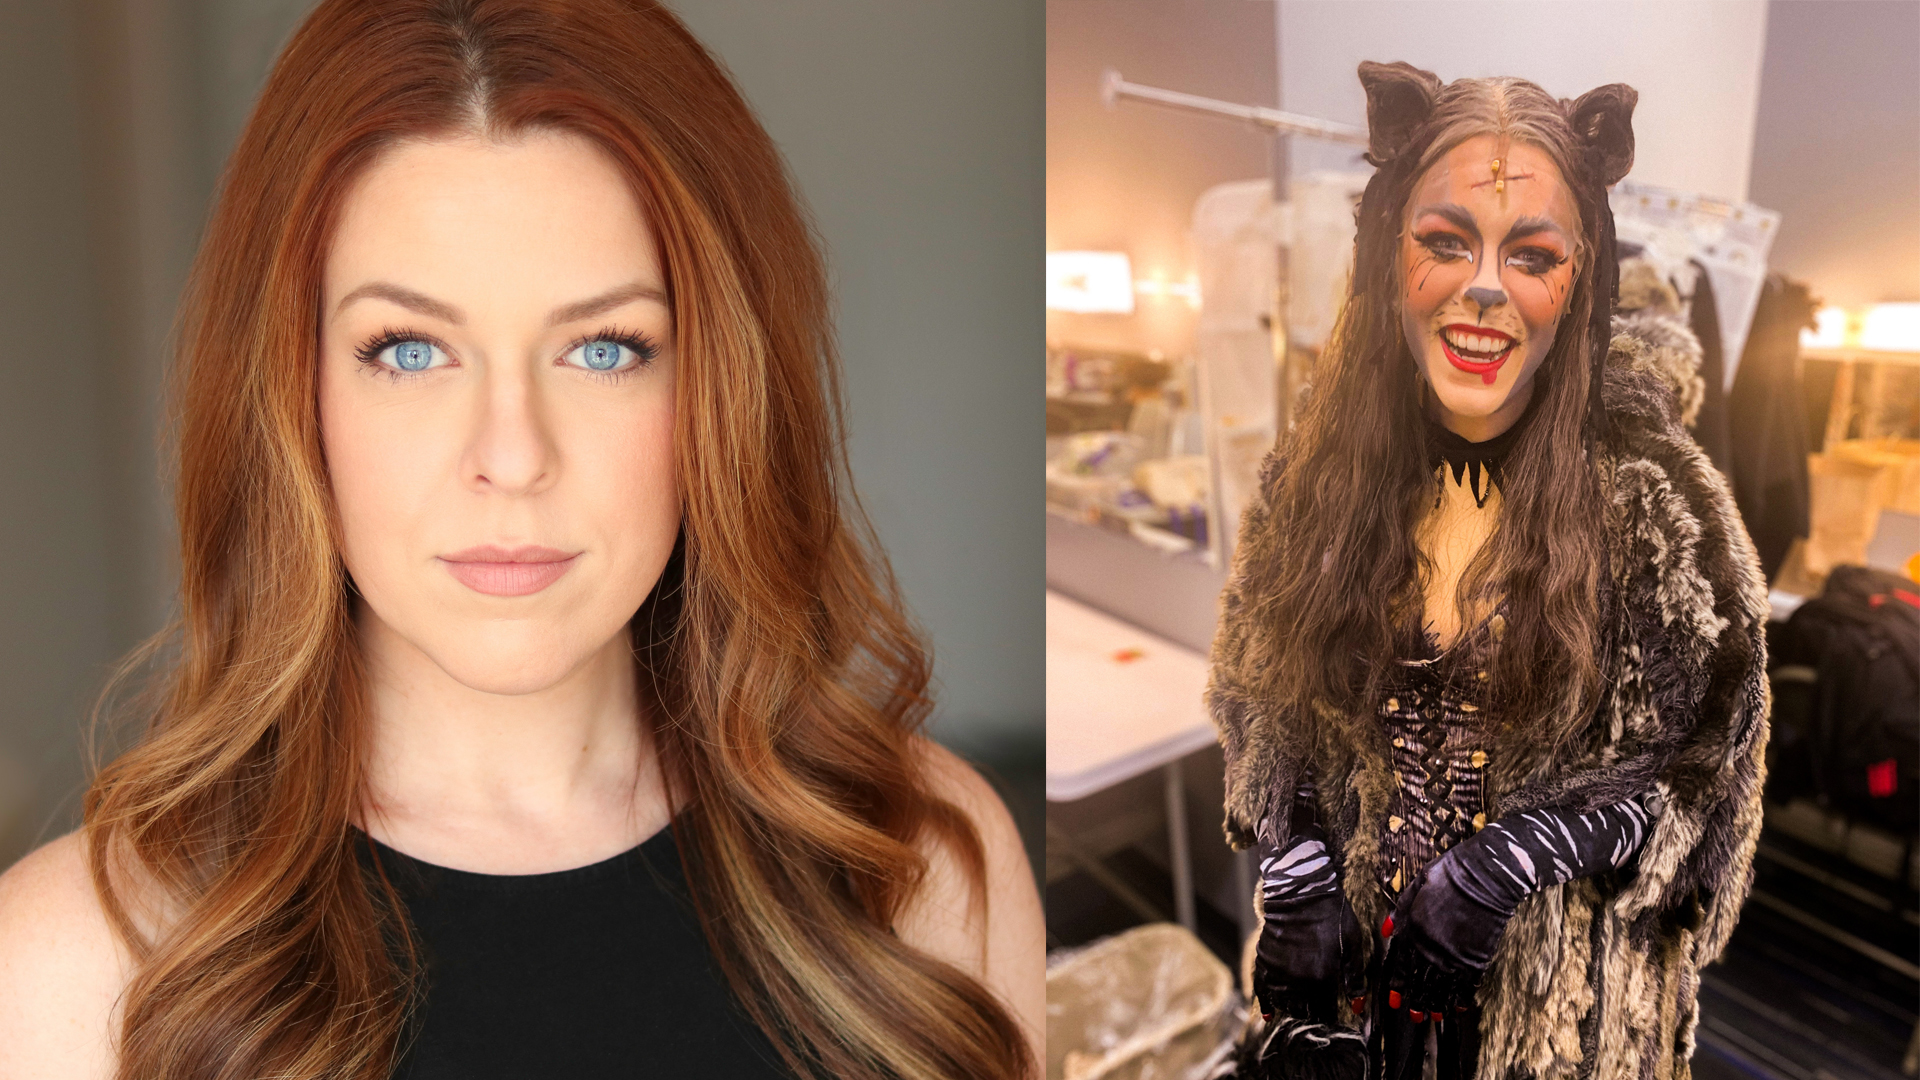 Kelliann DeCarlo '13 is a swing for Grizabella and Jellylorum in the tour of Cats (Photo: Shannon Rakow Photography/Kelliann DeCarlo)